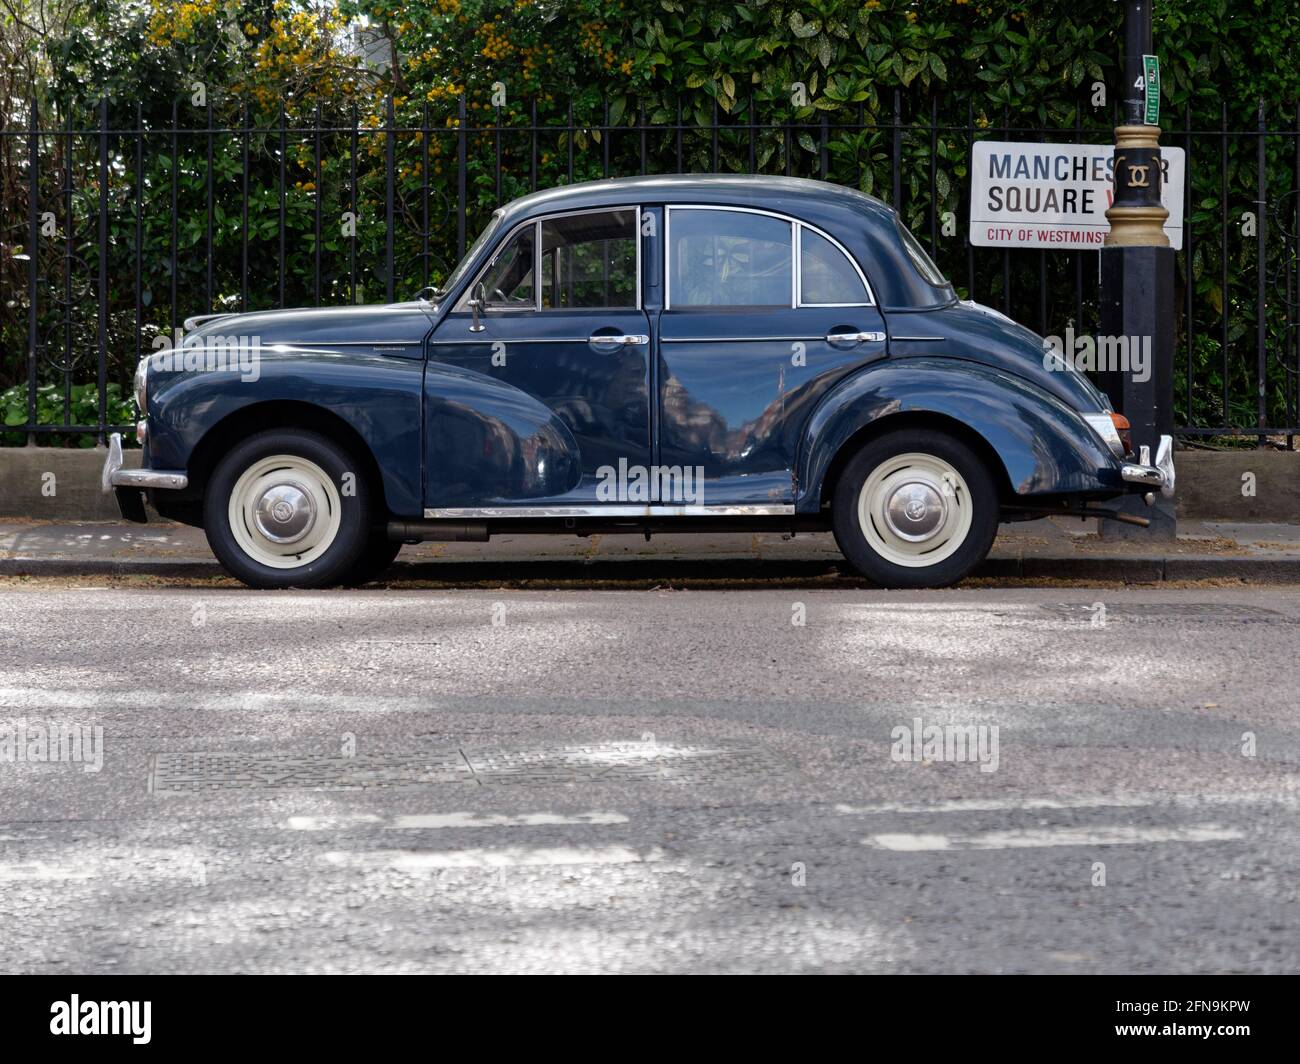 London, Greater London, England - May 11 2021:  Cute vintage car parked at Manchester Square. Stock Photo